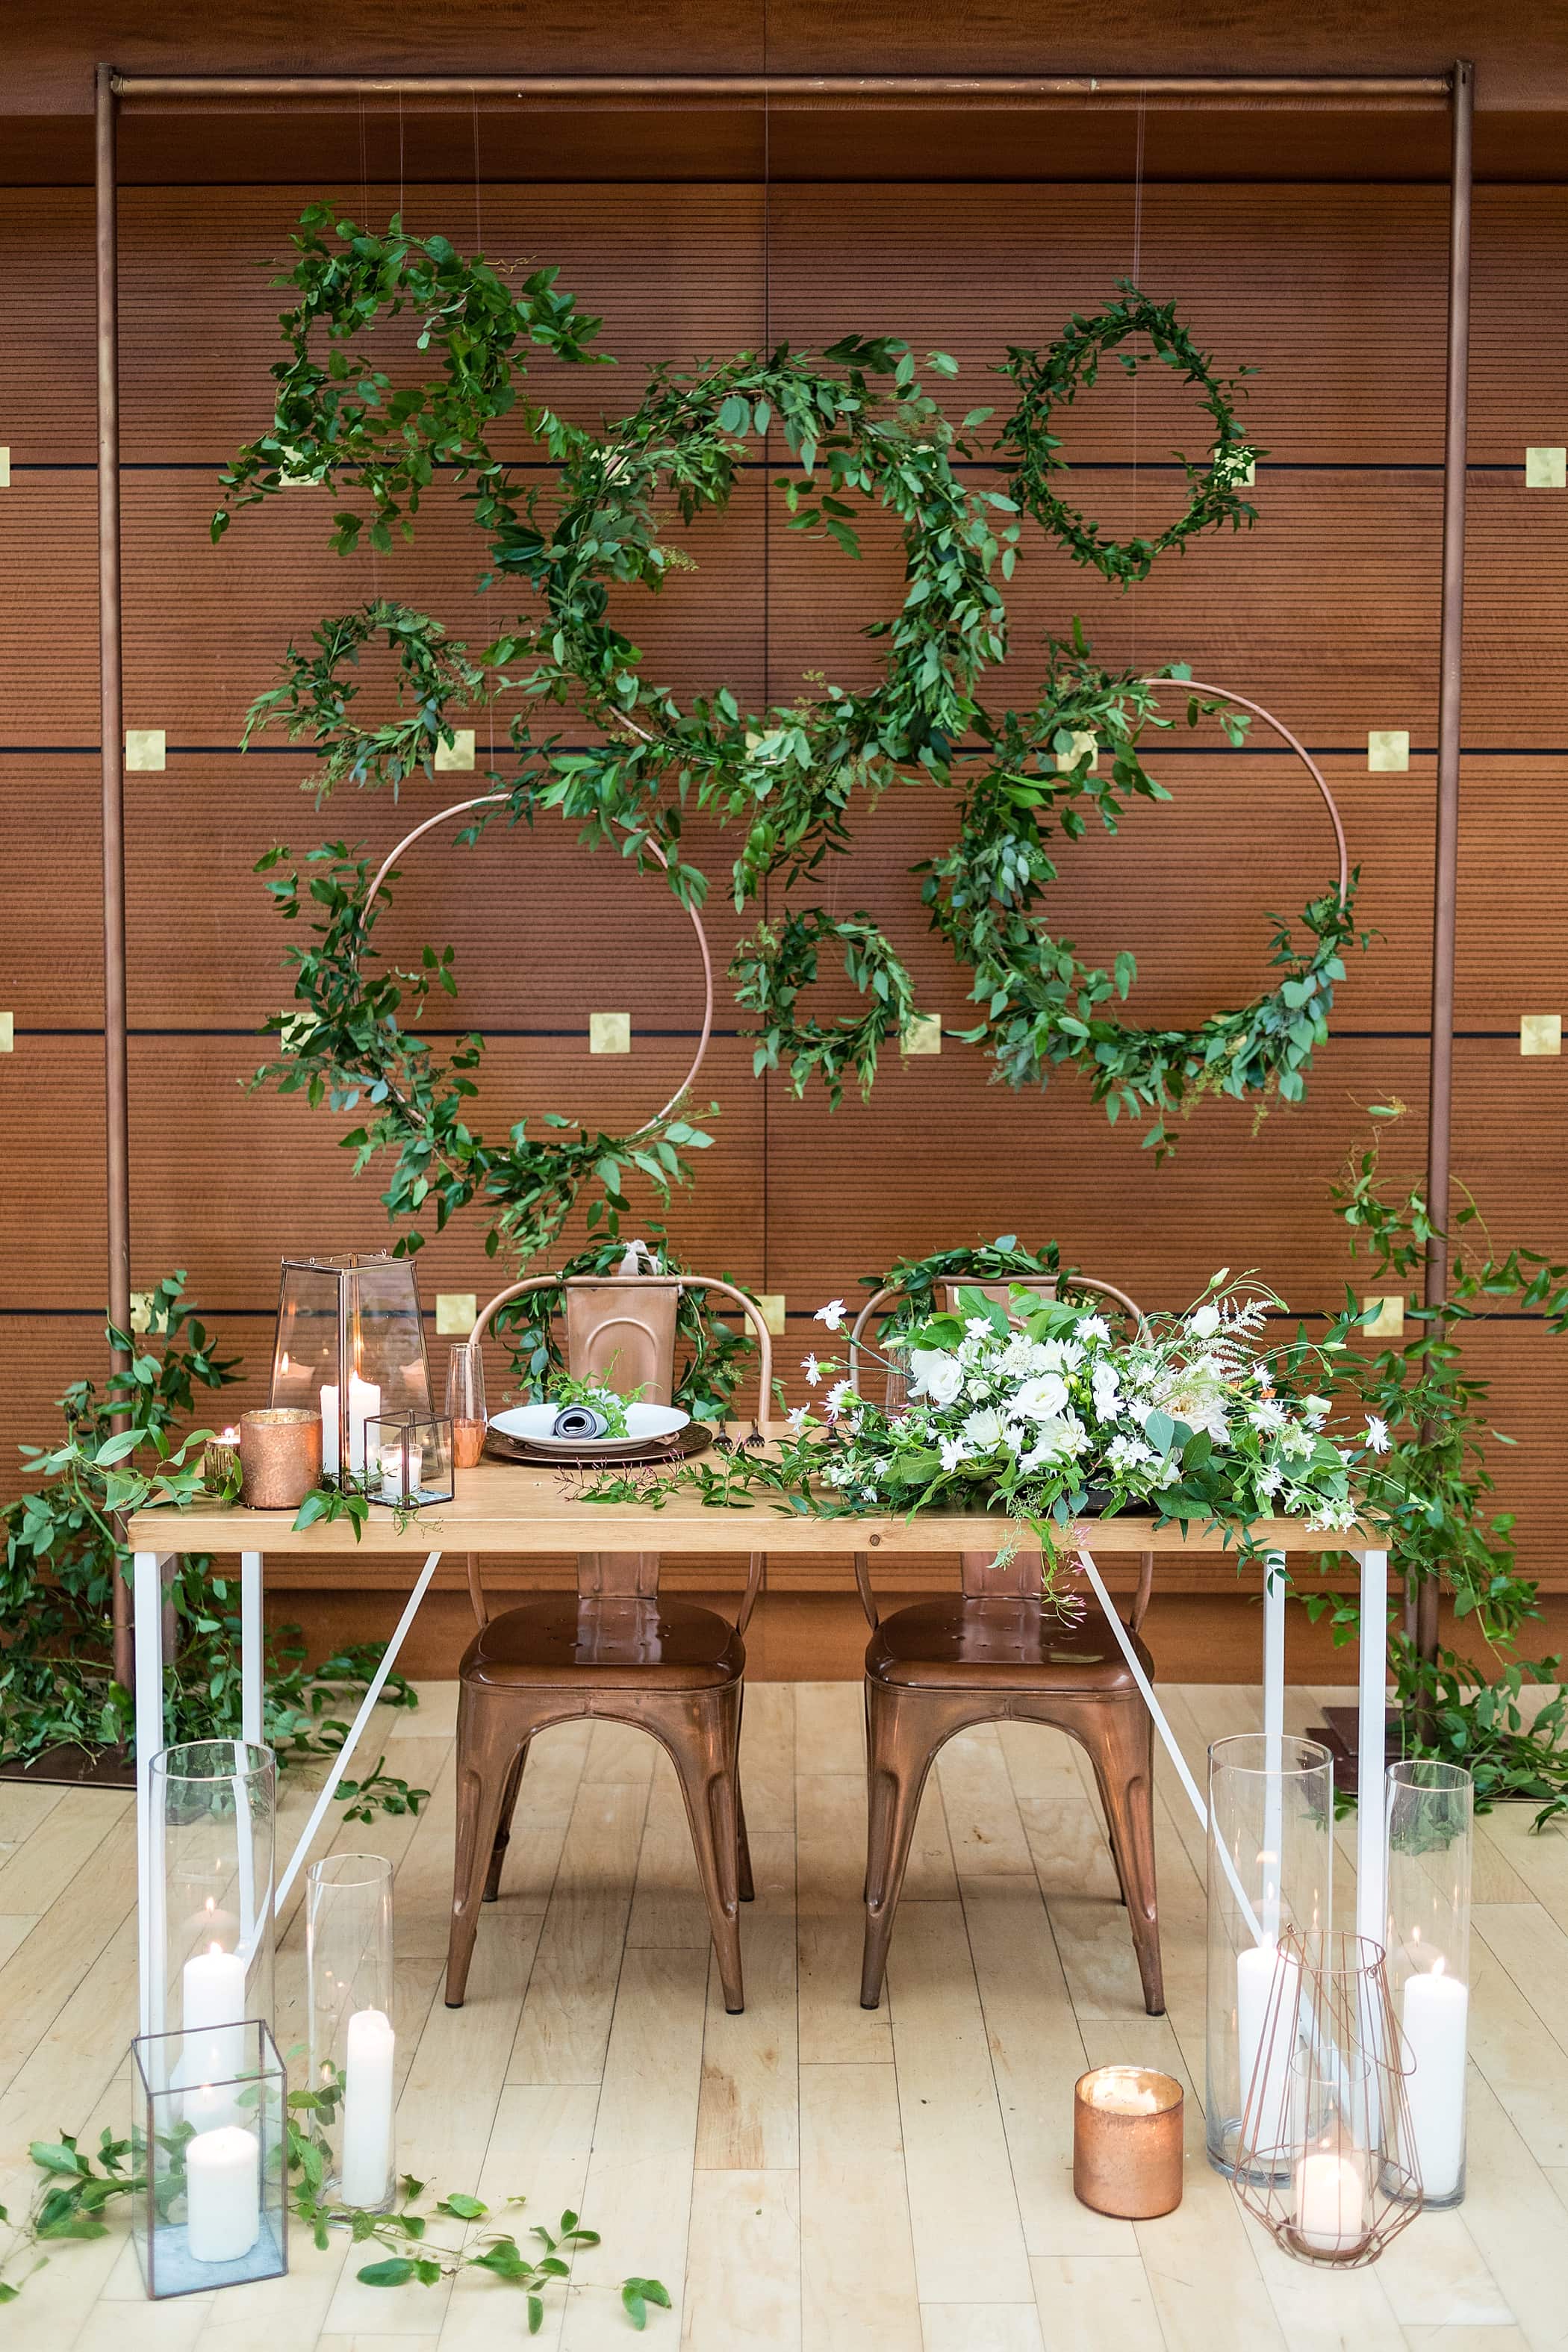 Sweetheart table against the wooden walls of the Kimmel Center with wreaths of copper piping and loose greenery